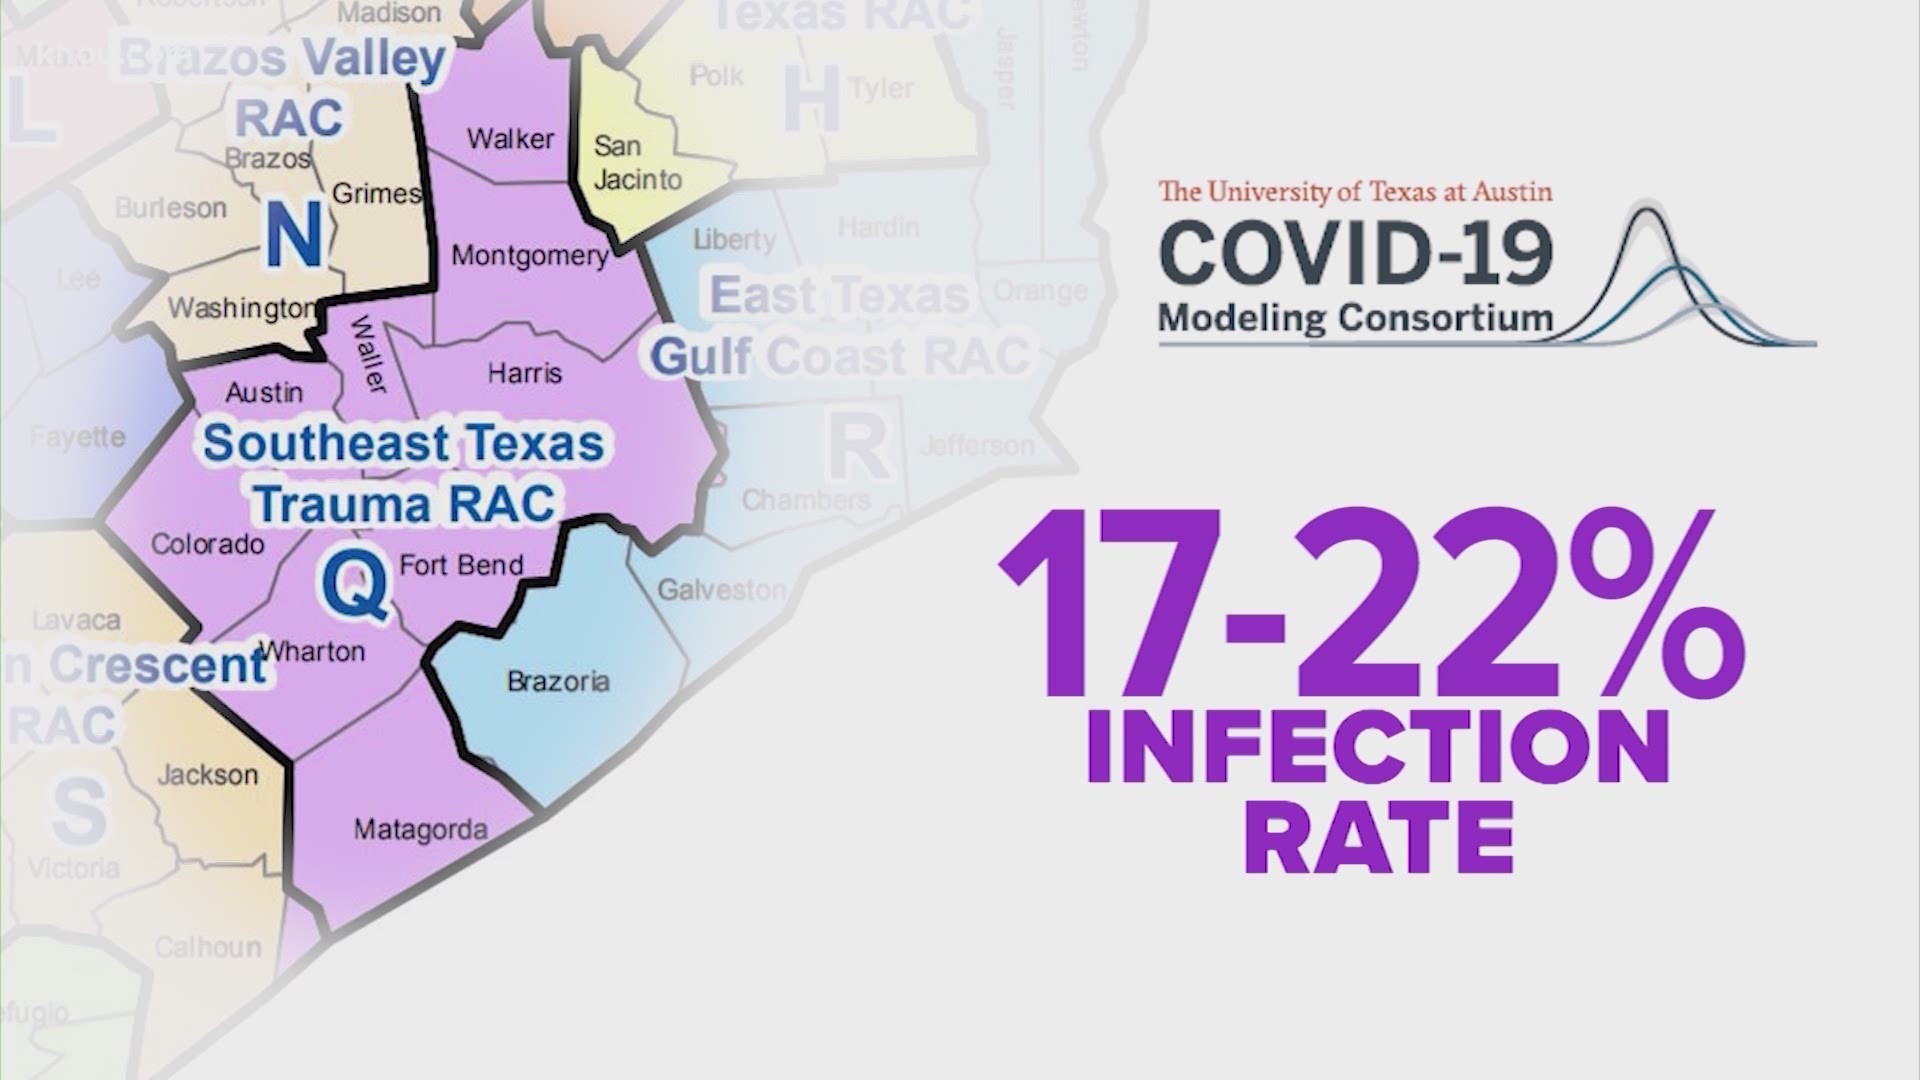 Probably the most common way to find out if you've had COVID-19, is see if you have the antibodies to the virus.